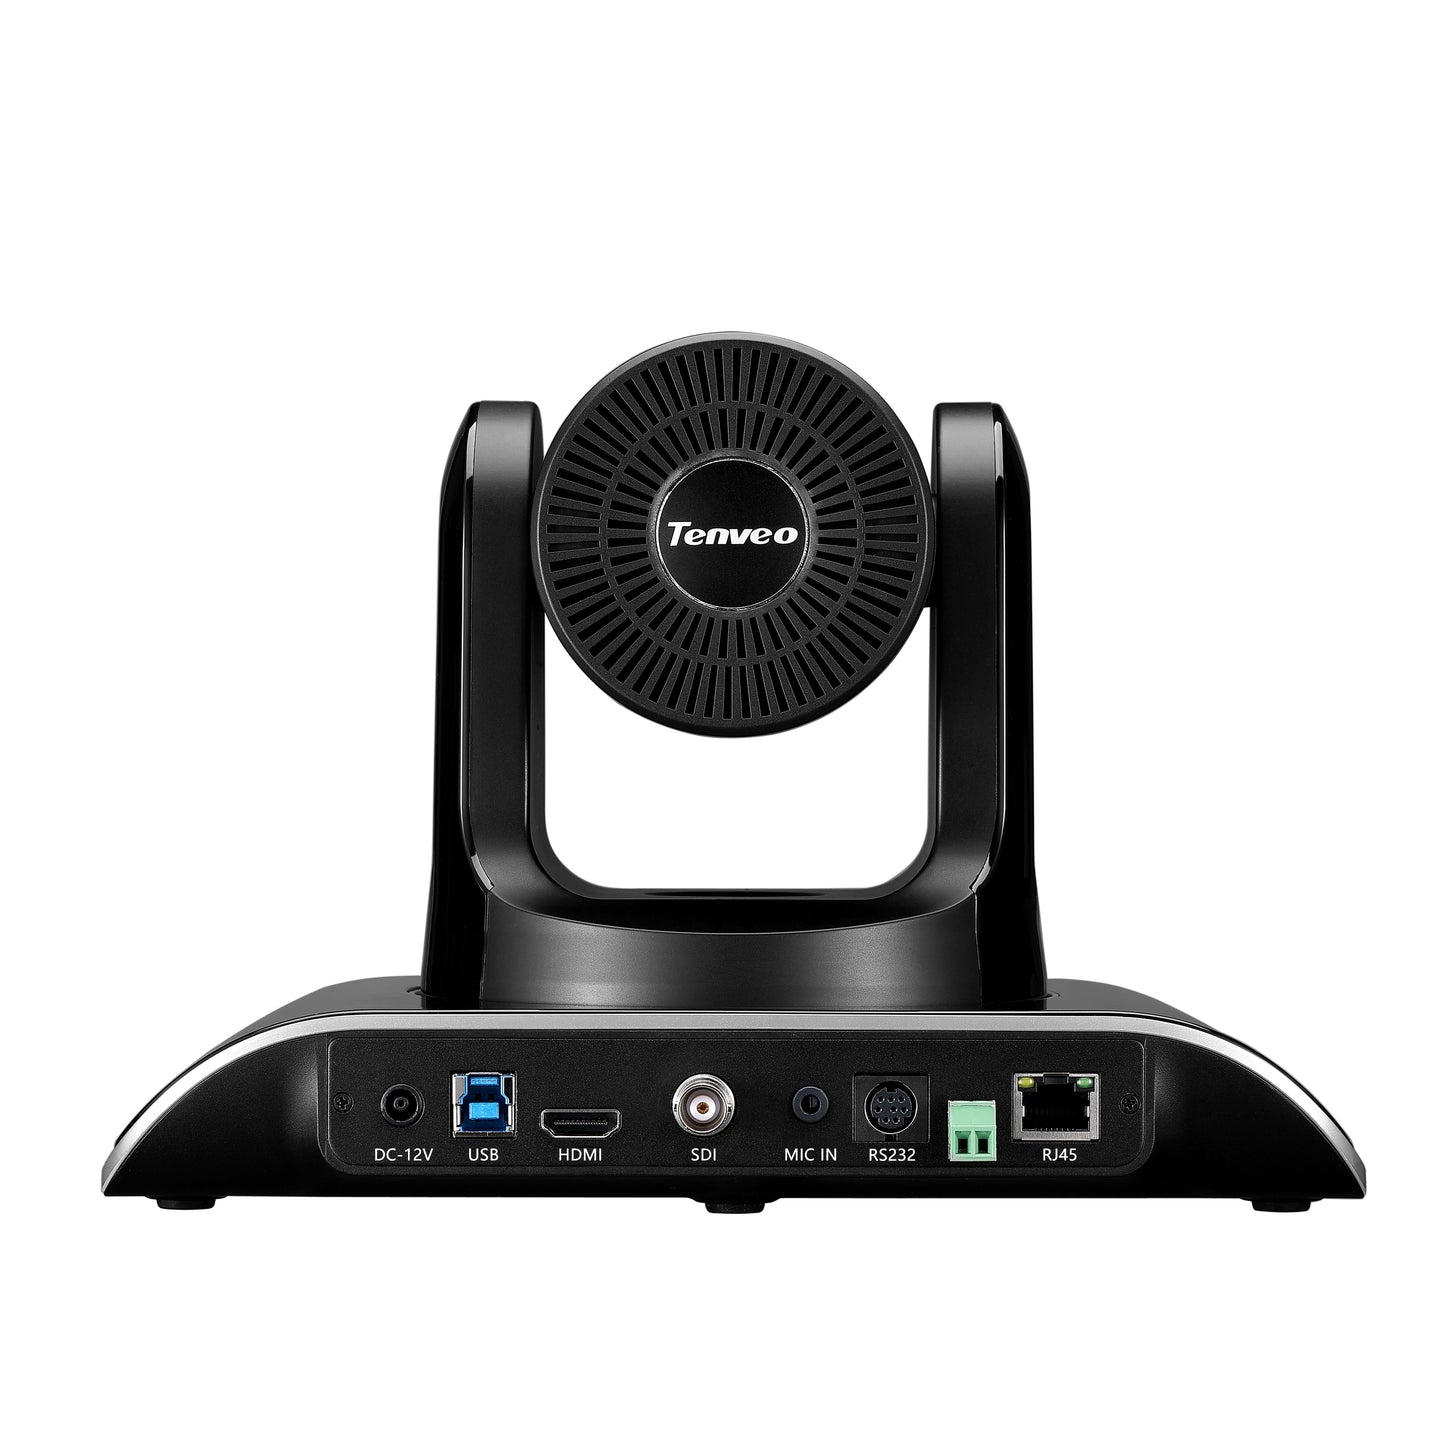 Tenveo TEVO-VHD20N FHD 1080p 3G-SDI/HDMI Video Conference Camera with 340 / 120 Degree Pan and Tilt, 20X Optical Zoom, and Remote Control